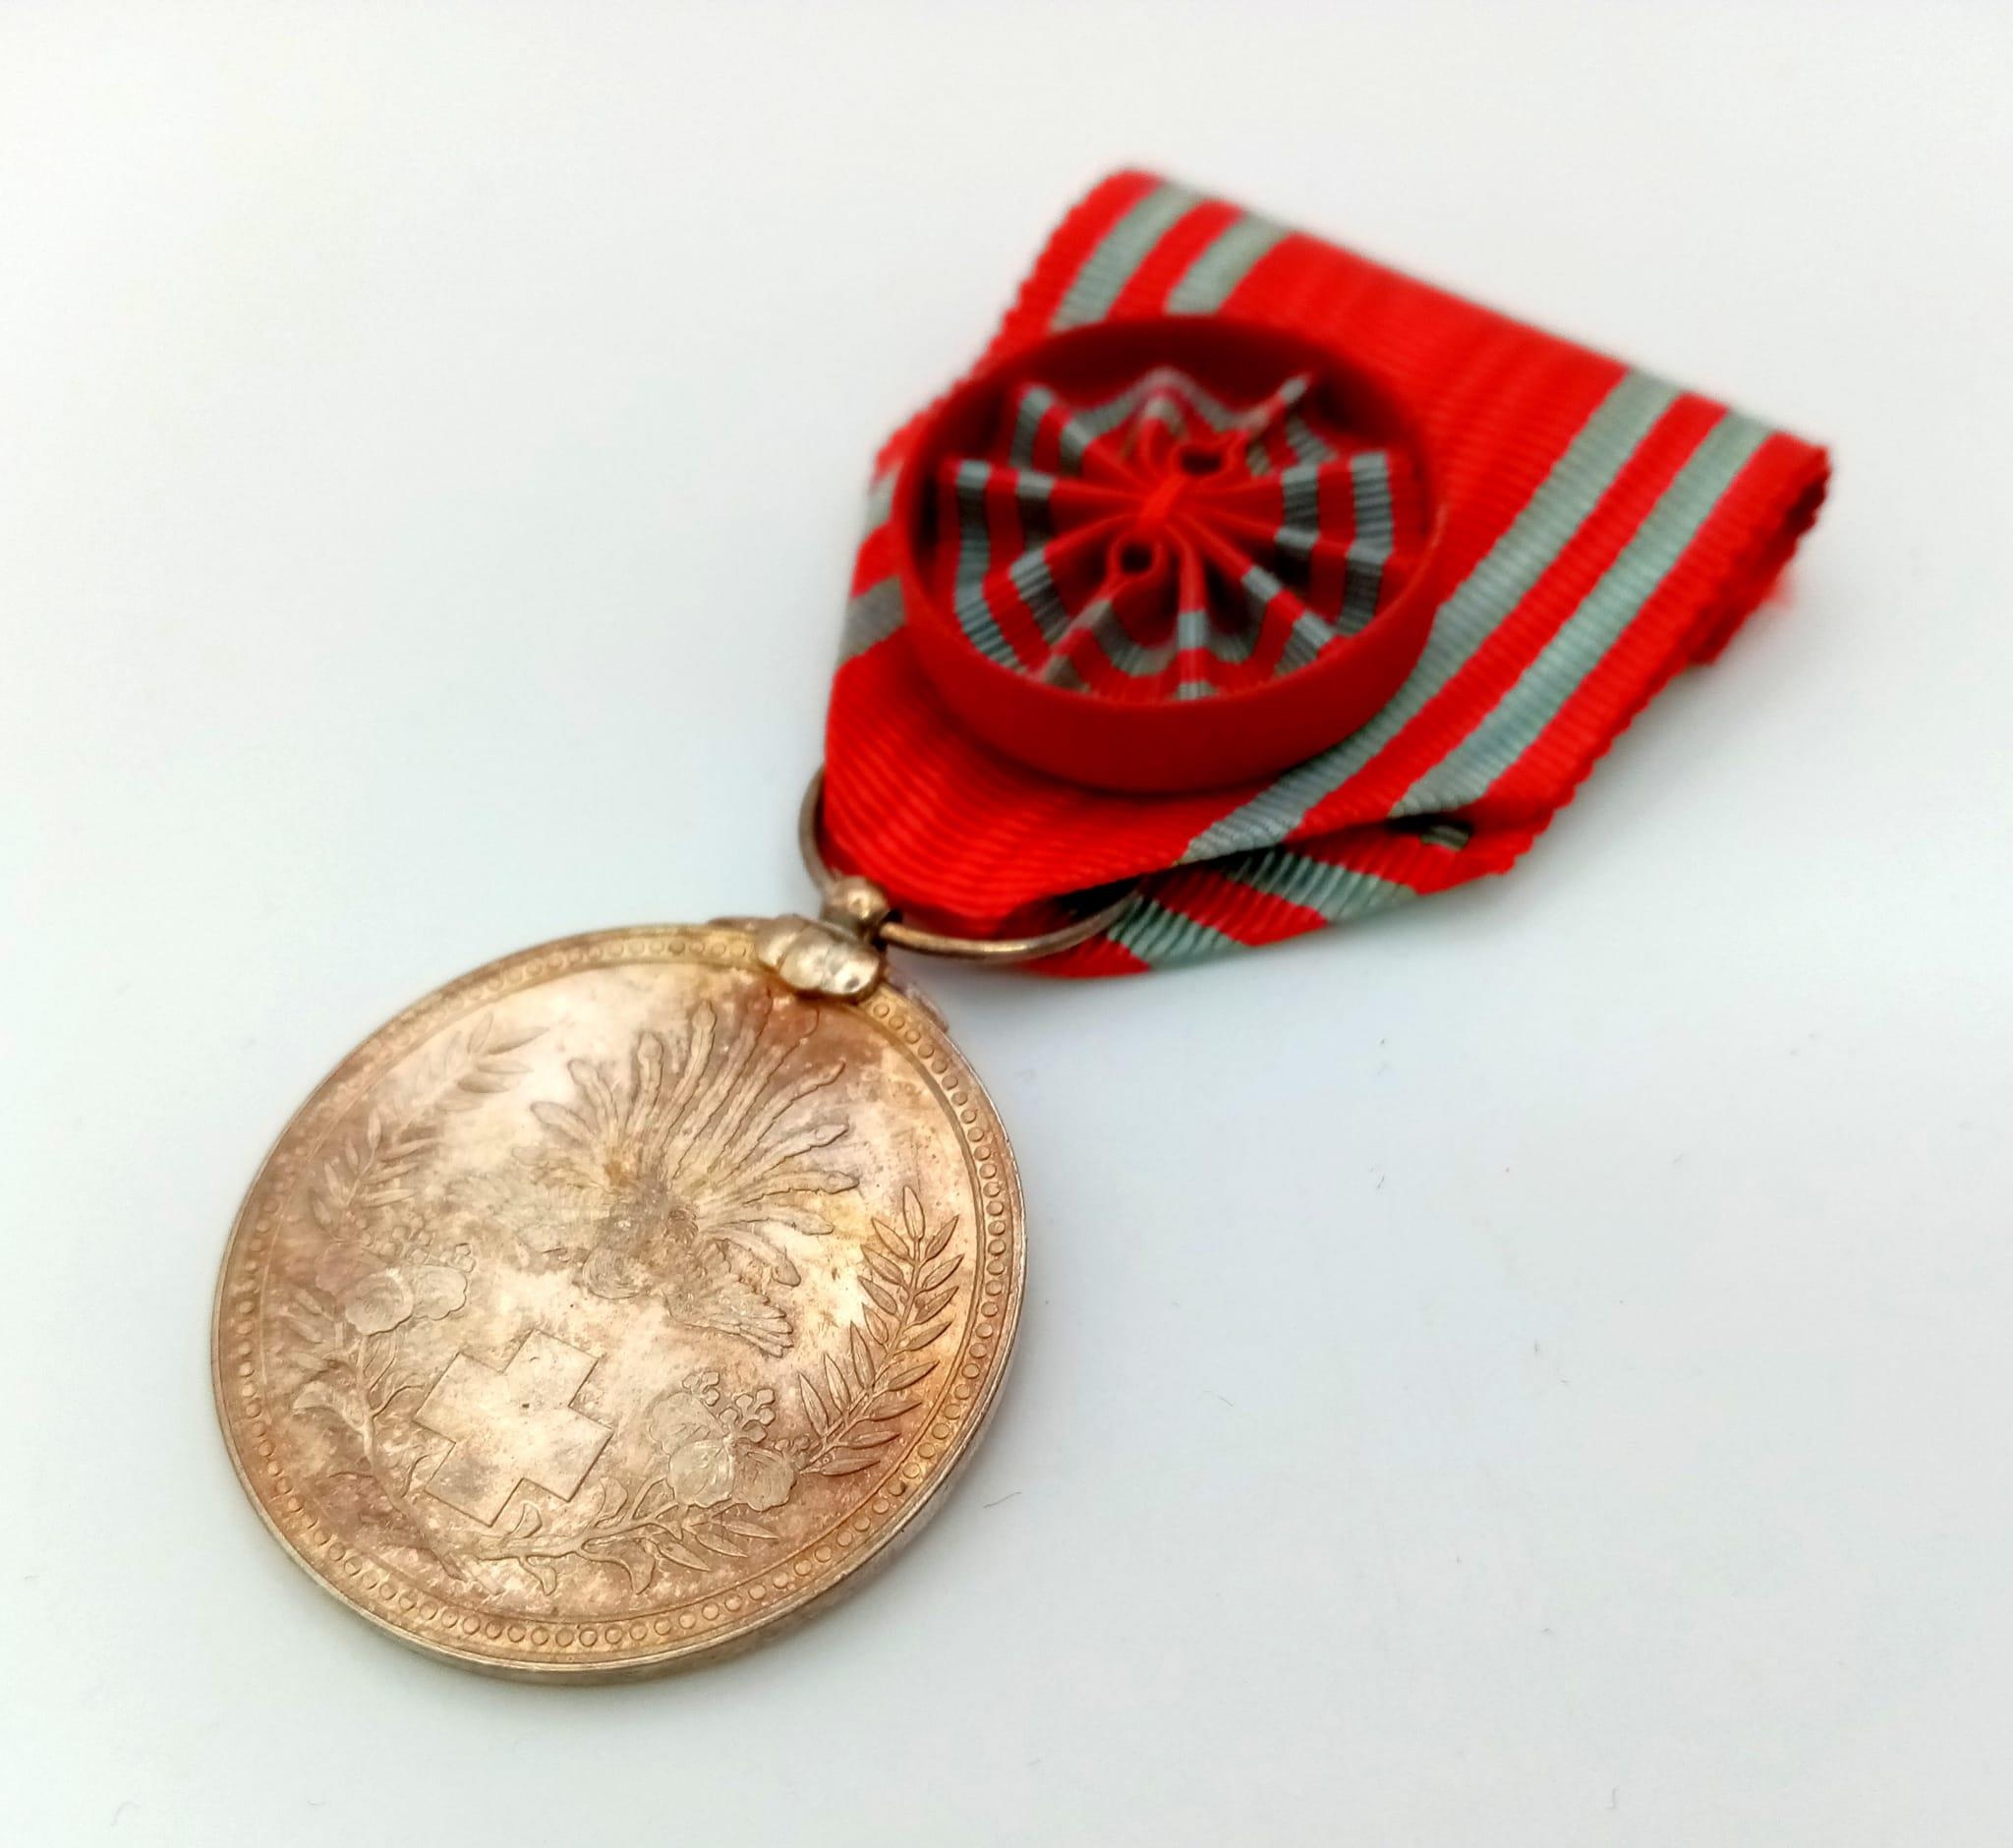 Japanese WW2 Red Cross Order Medal with Rosette, comes in Original Presentation Box. - Image 3 of 4